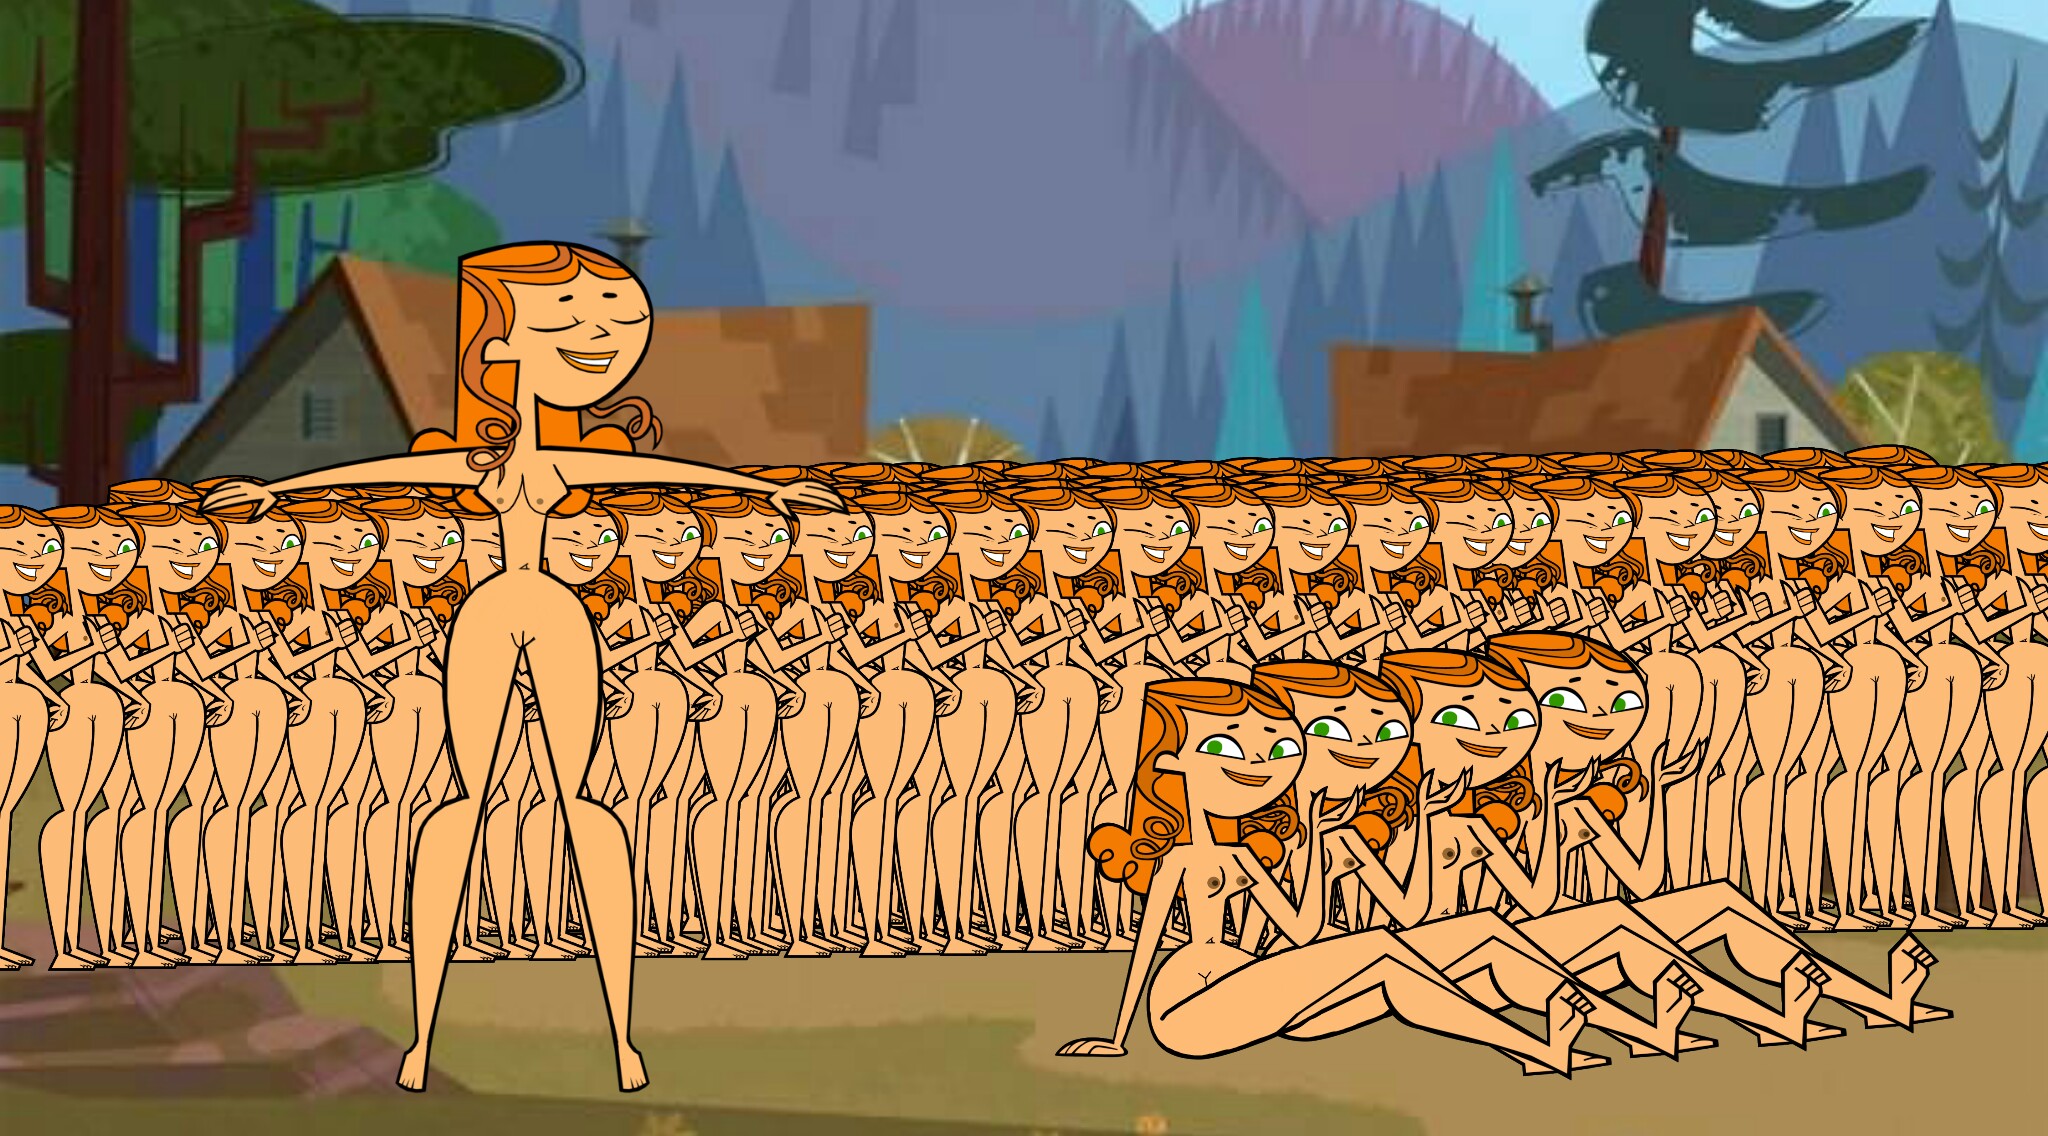 bettina chang recommends total drama izzy nude pic